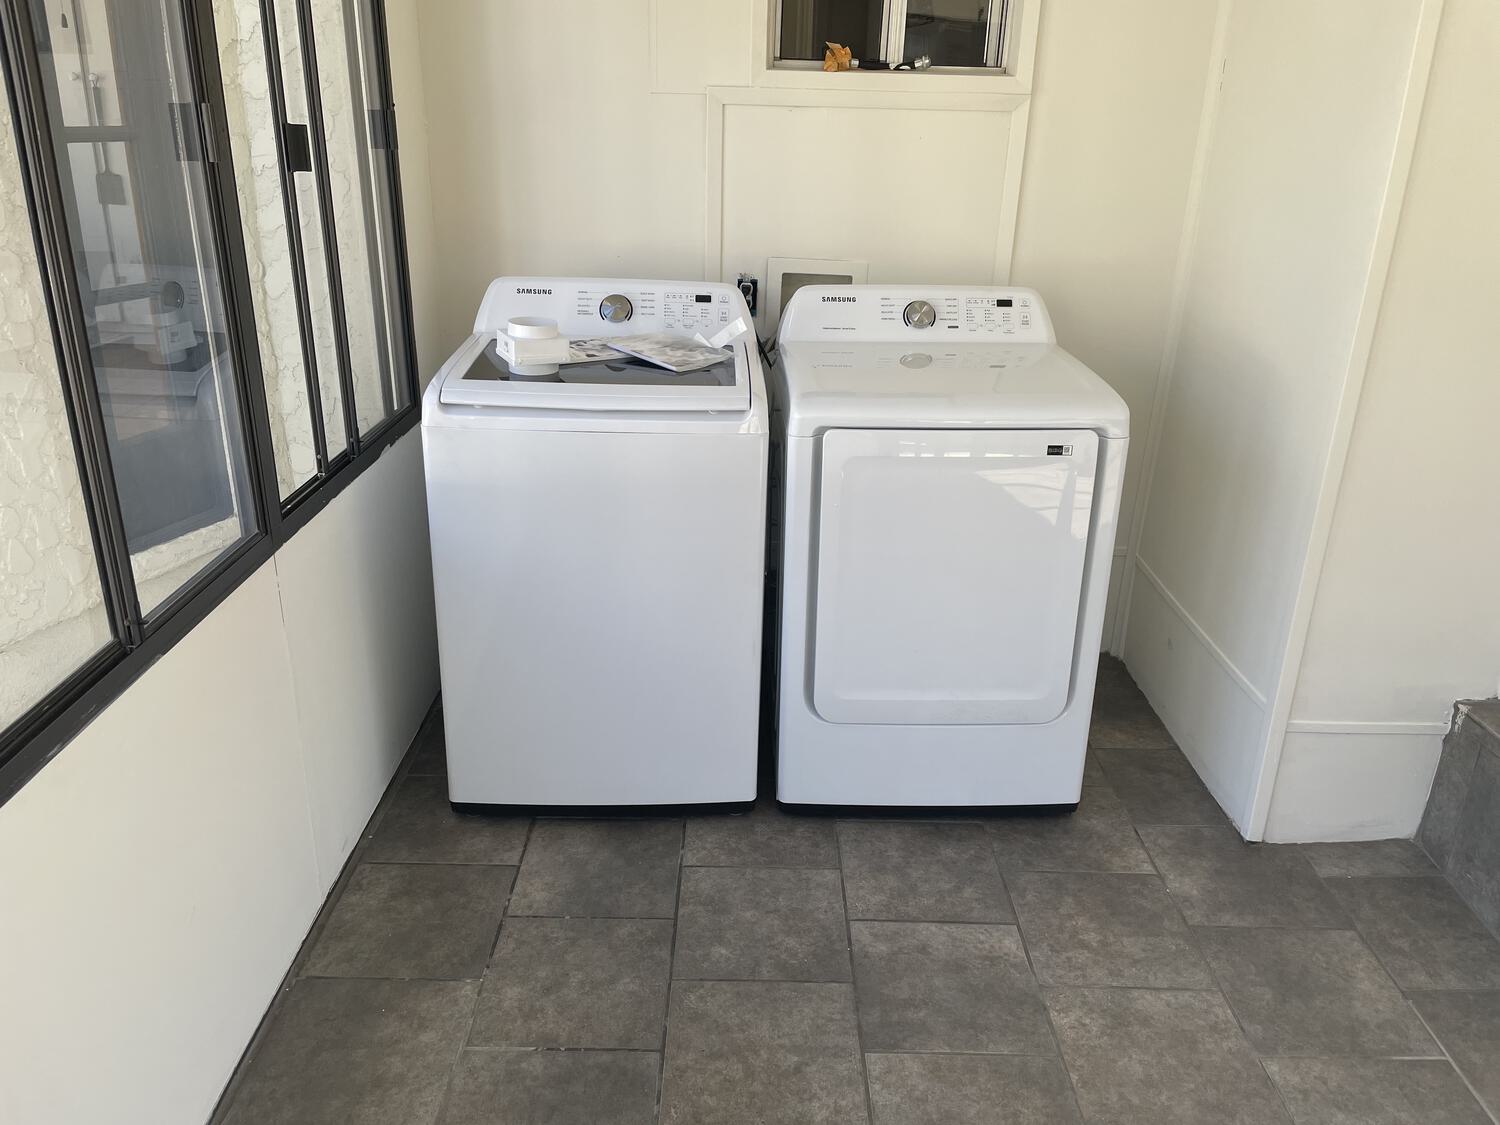 A washer and dryer, freshly installed in an empty room